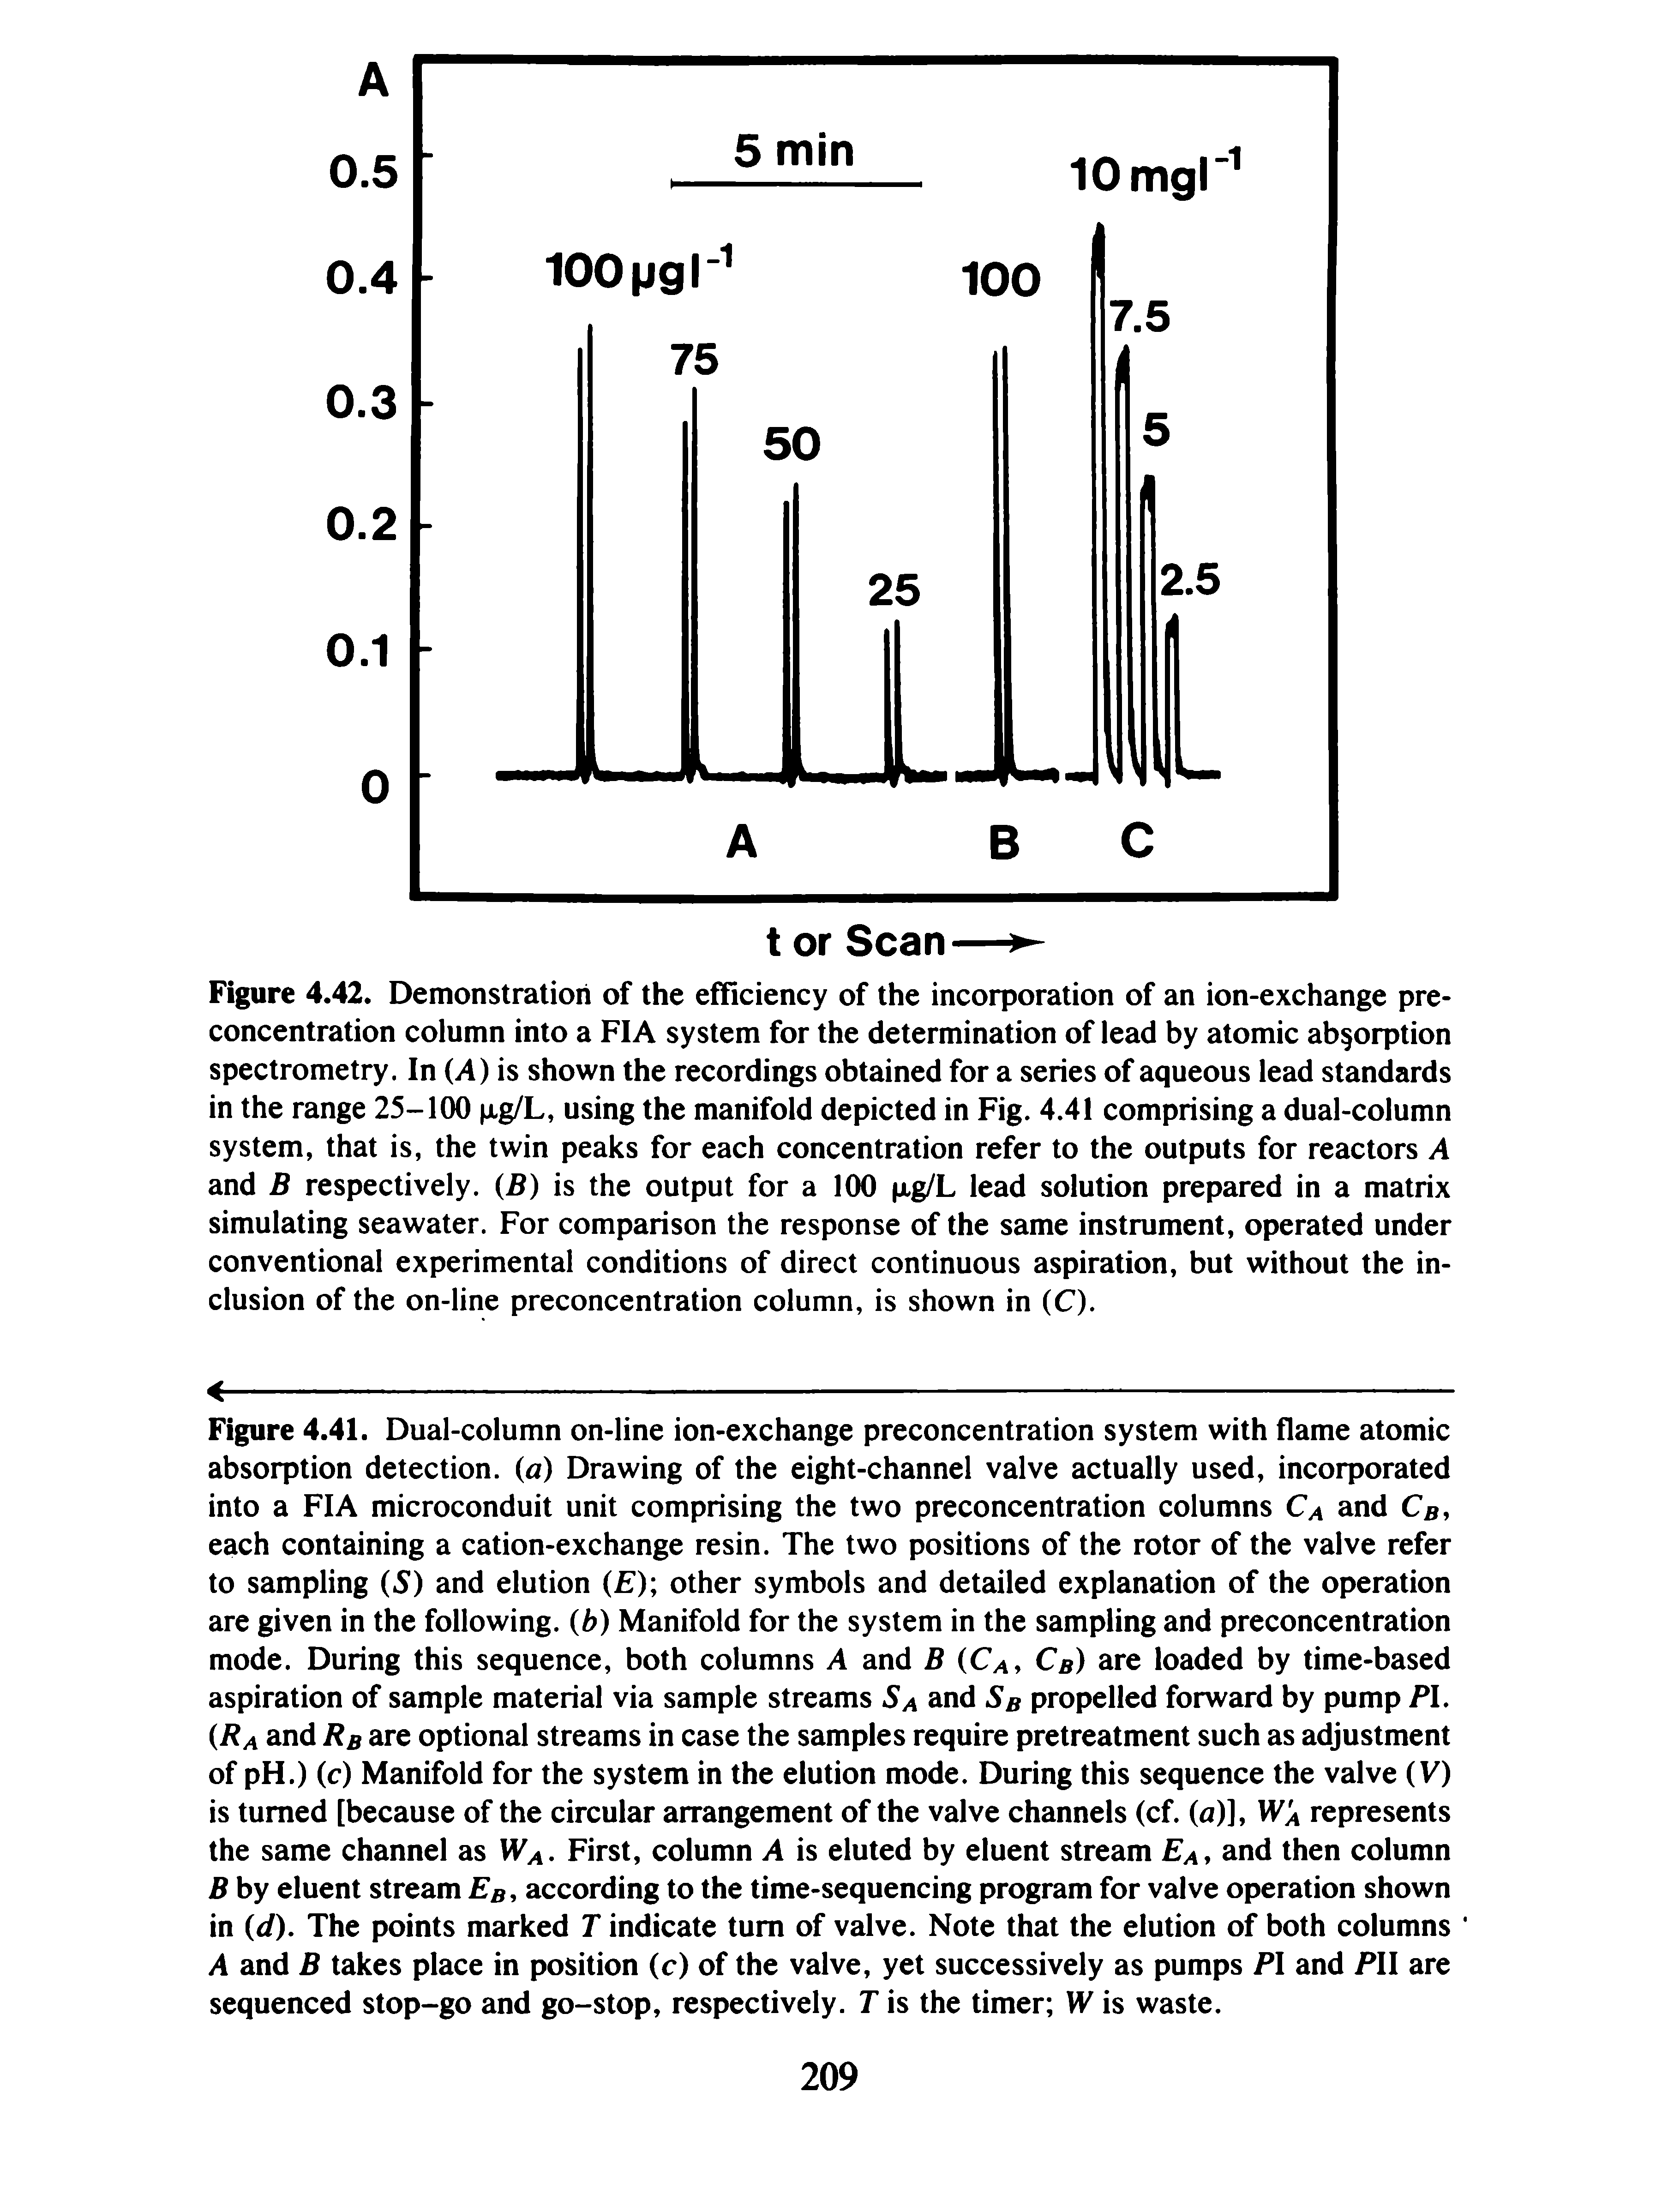 Figure 4.42. Demonstration of the efficiency of the incorporation of an ion-exchange preconcentration column into a FIA system for the determination of lead by atomic absorption spectrometry. In (A) is shown the recordings obtained for a series of aqueous lead standards in the range 25-100 xg/L, using the manifold depicted in Fig. 4.41 comprising a dual-column system, that is, the twin peaks for each concentration refer to the outputs for reactors A and B respectively. (B) is the output for a 100 tig/L lead solution prepared in a matrix simulating seawater. For comparison the response of the same instrument, operated under conventional experimental conditions of direct continuous aspiration, but without the inclusion of the on-line preconcentration column, is shown in (C).